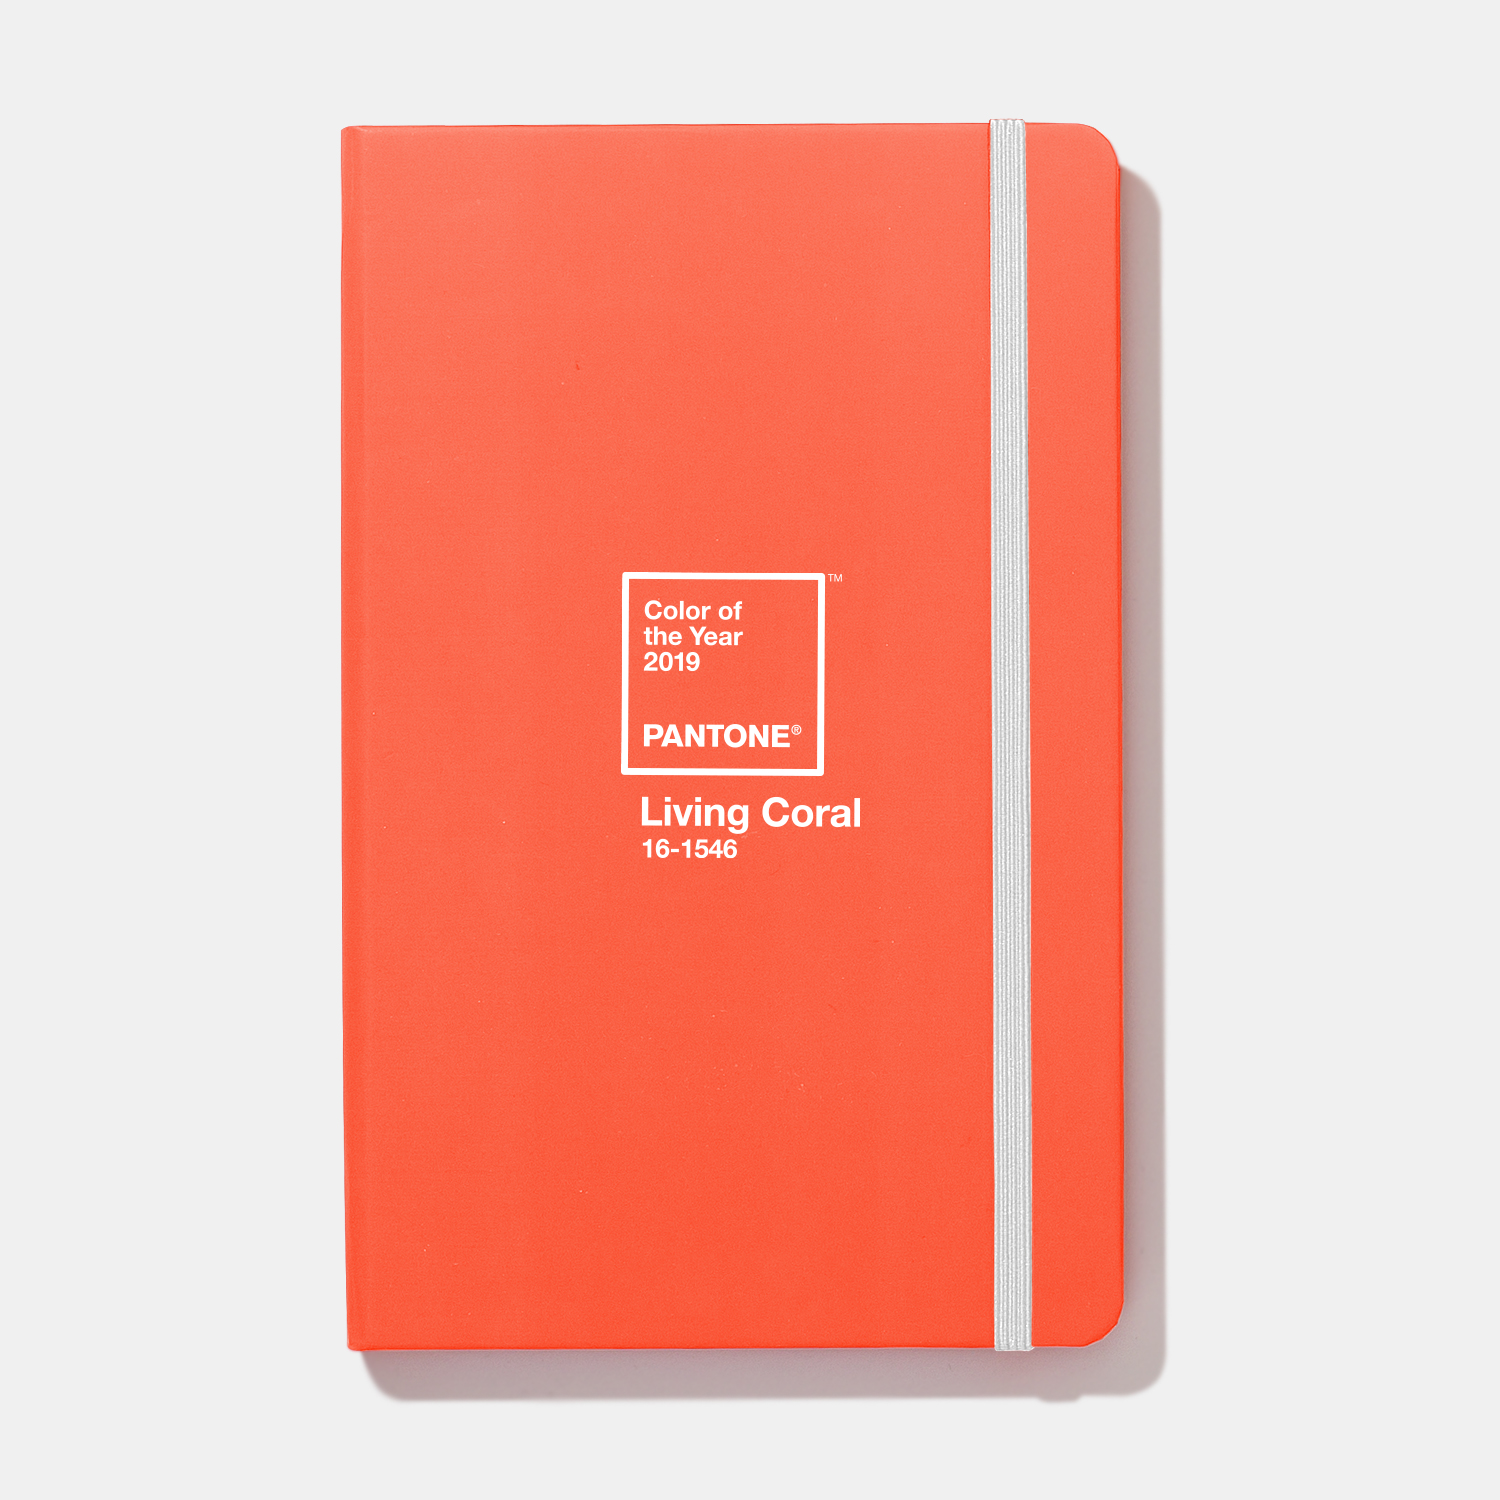 Pantone Limited Edition Journal, Pantone Color of the Year 2019, Living Coral - View 1